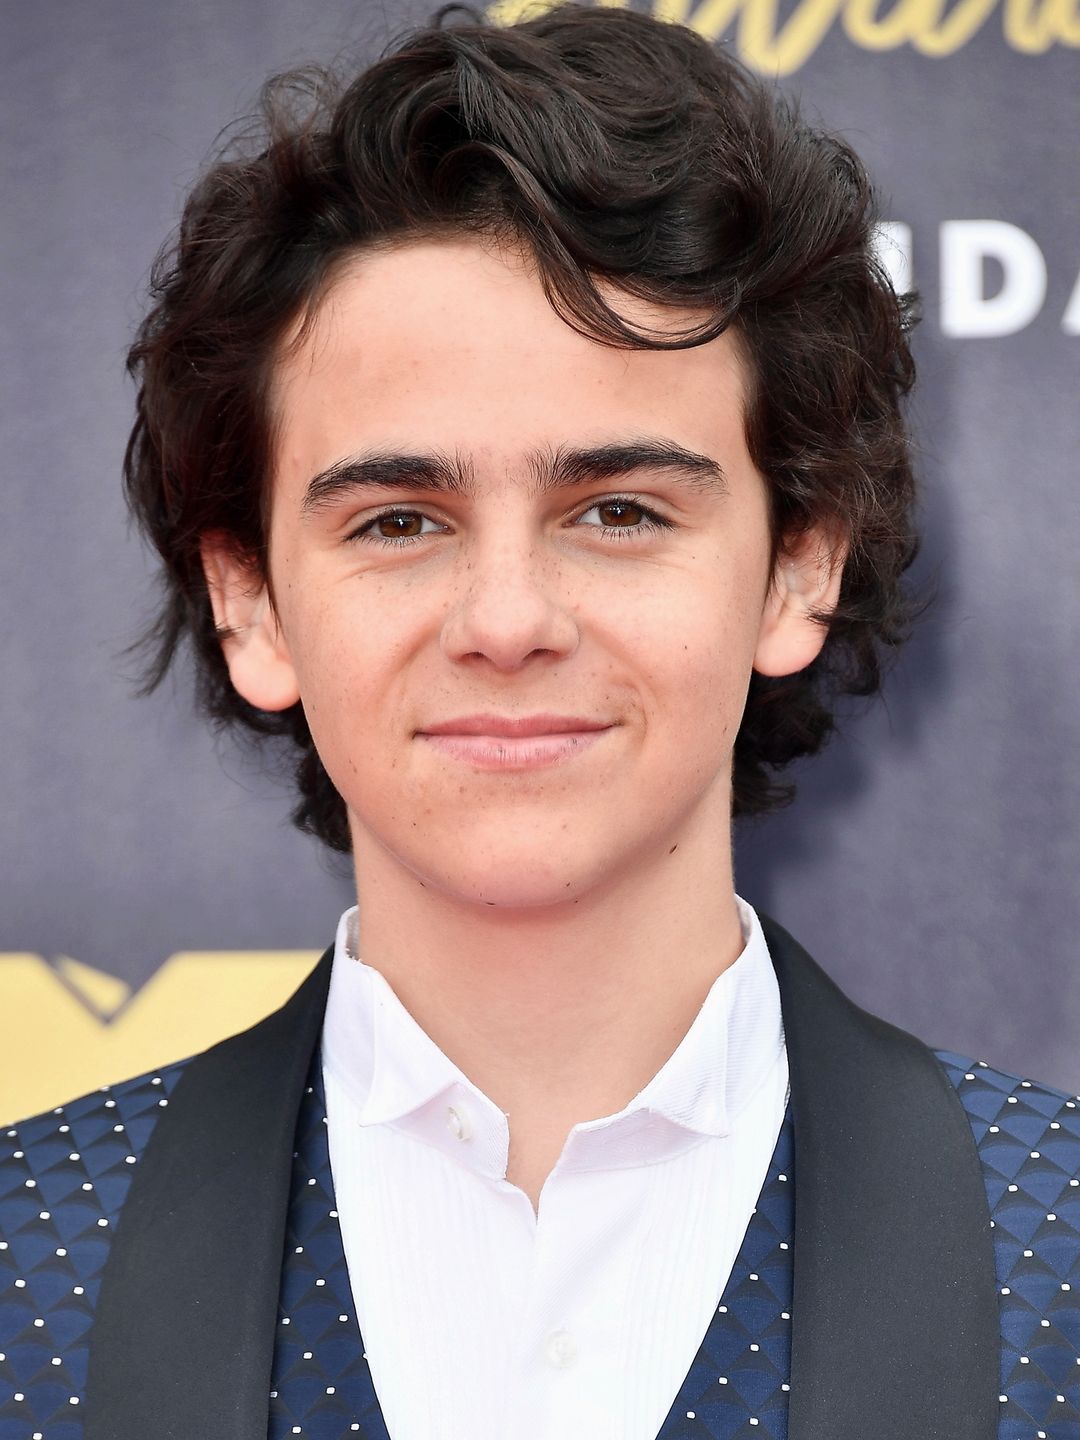 Jack Grazer who are his parents